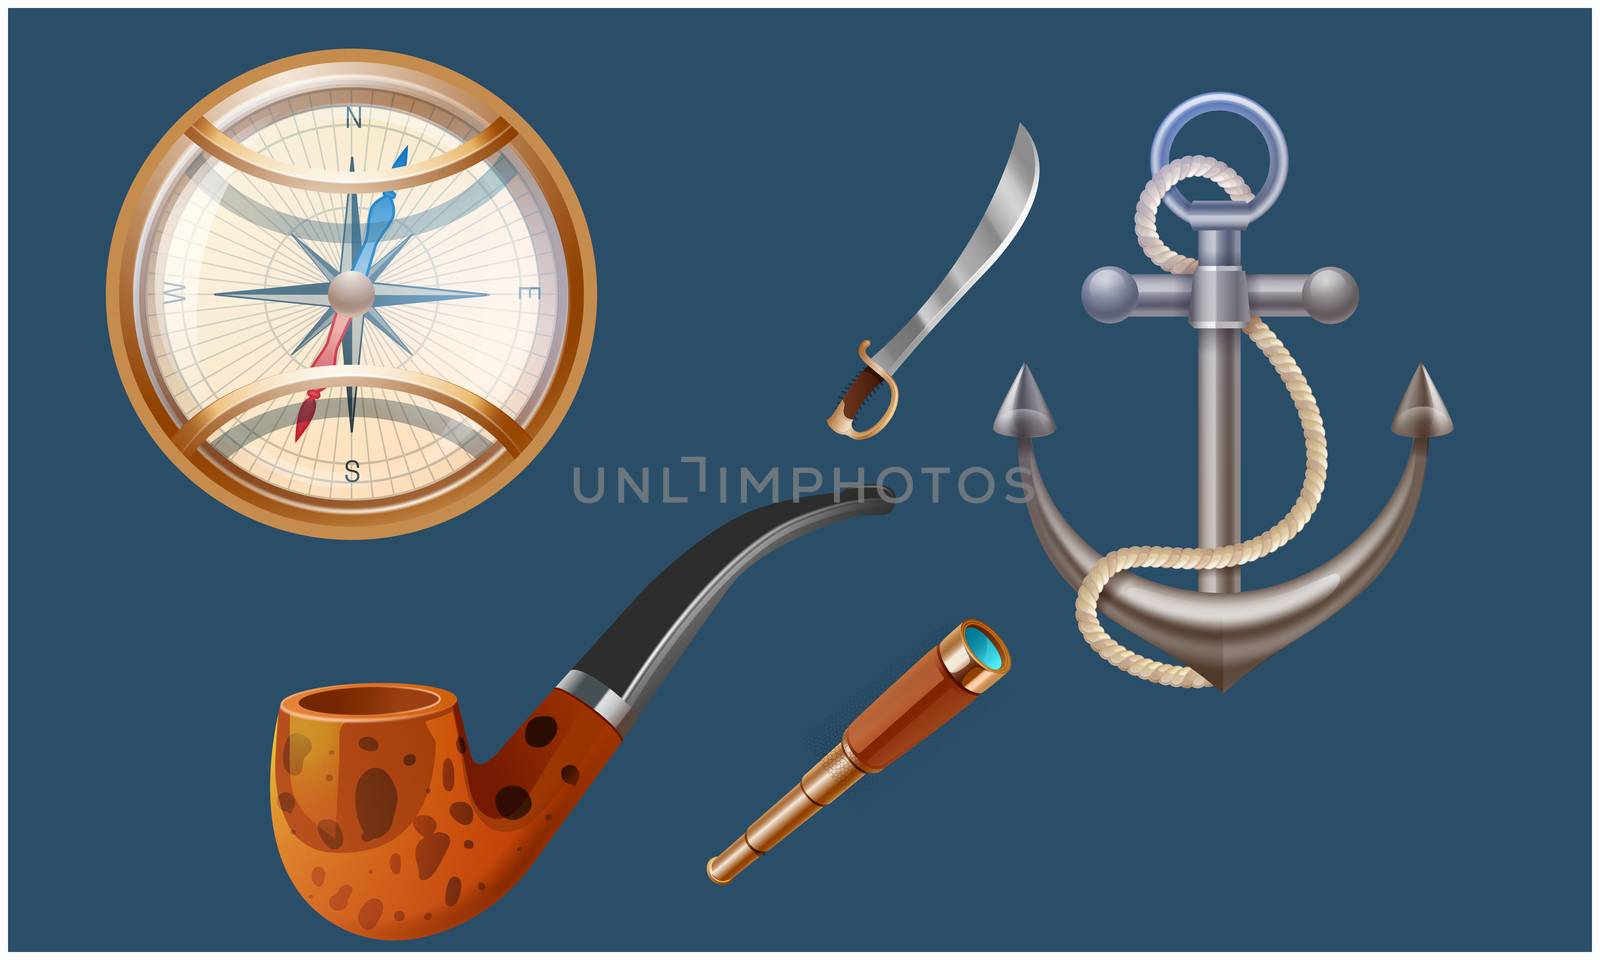 mock up illustration of treasure hunt game equipment on abstract backgrounds by aanavcreationsplus